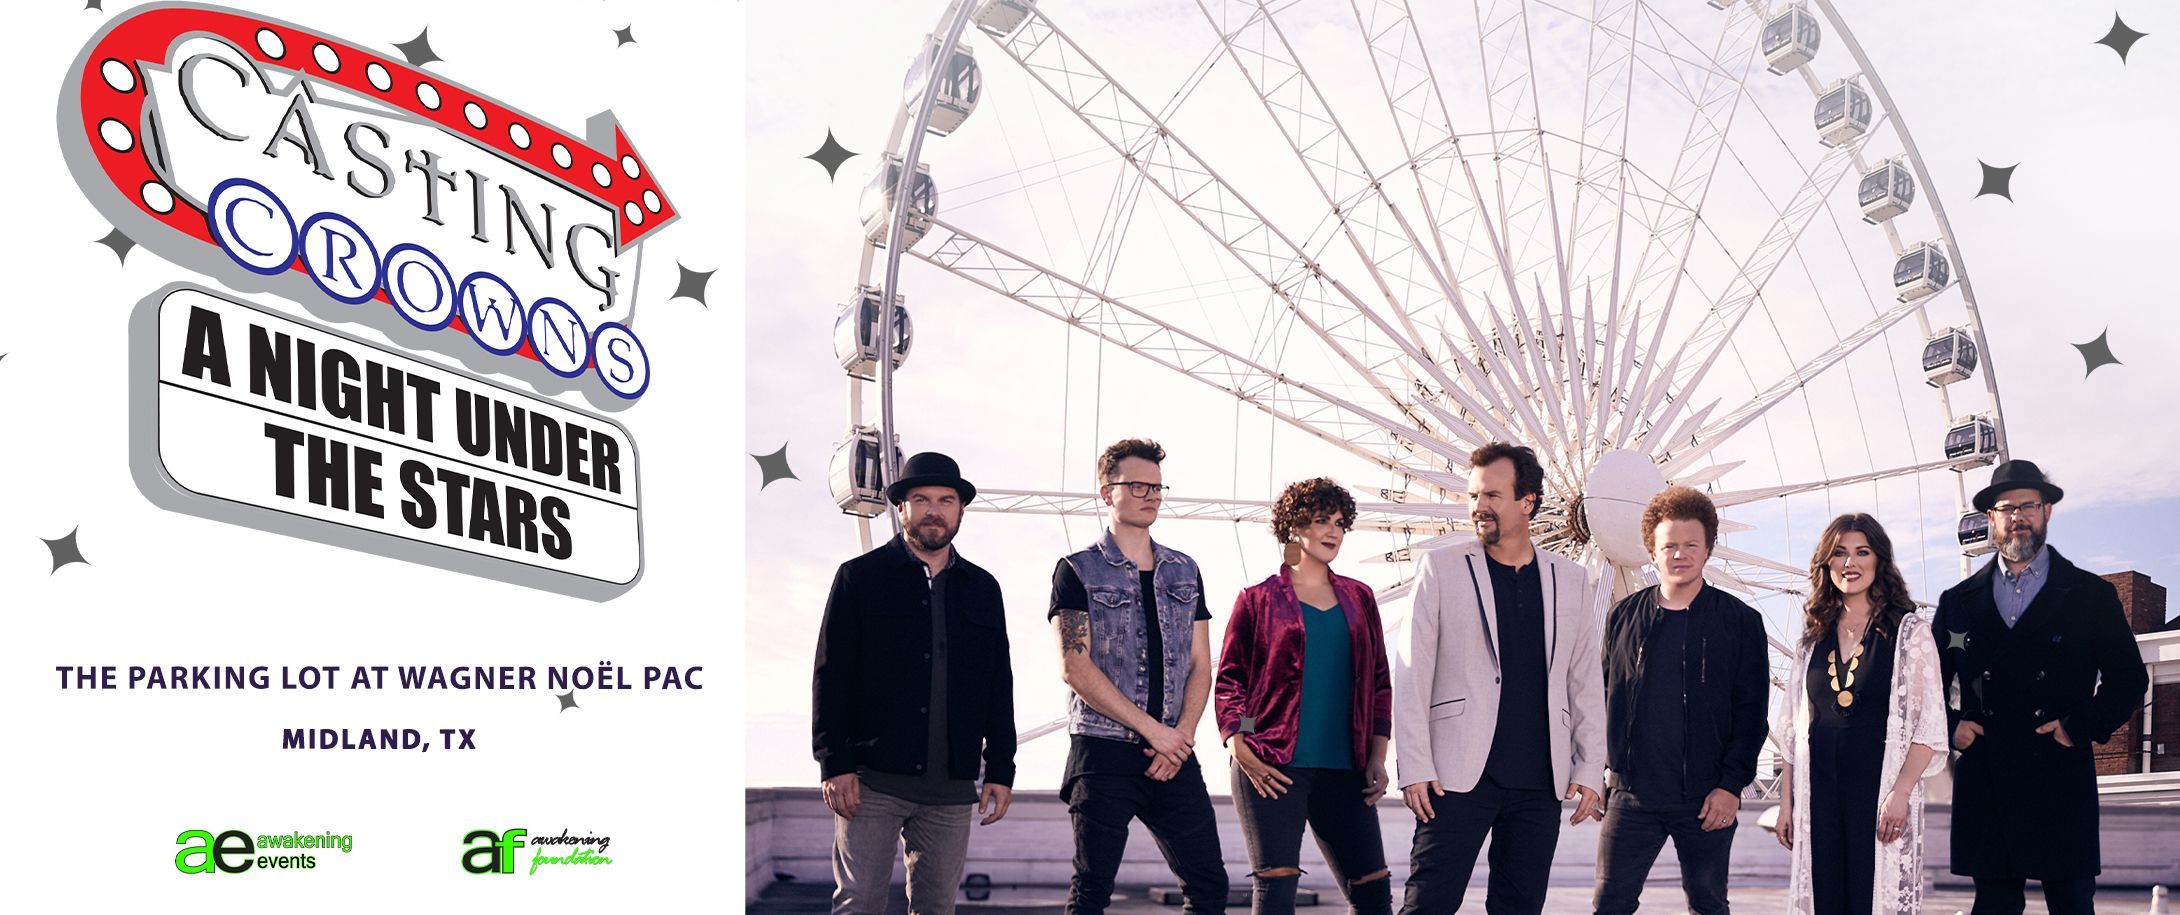 Compassion Presents Casting Crowns